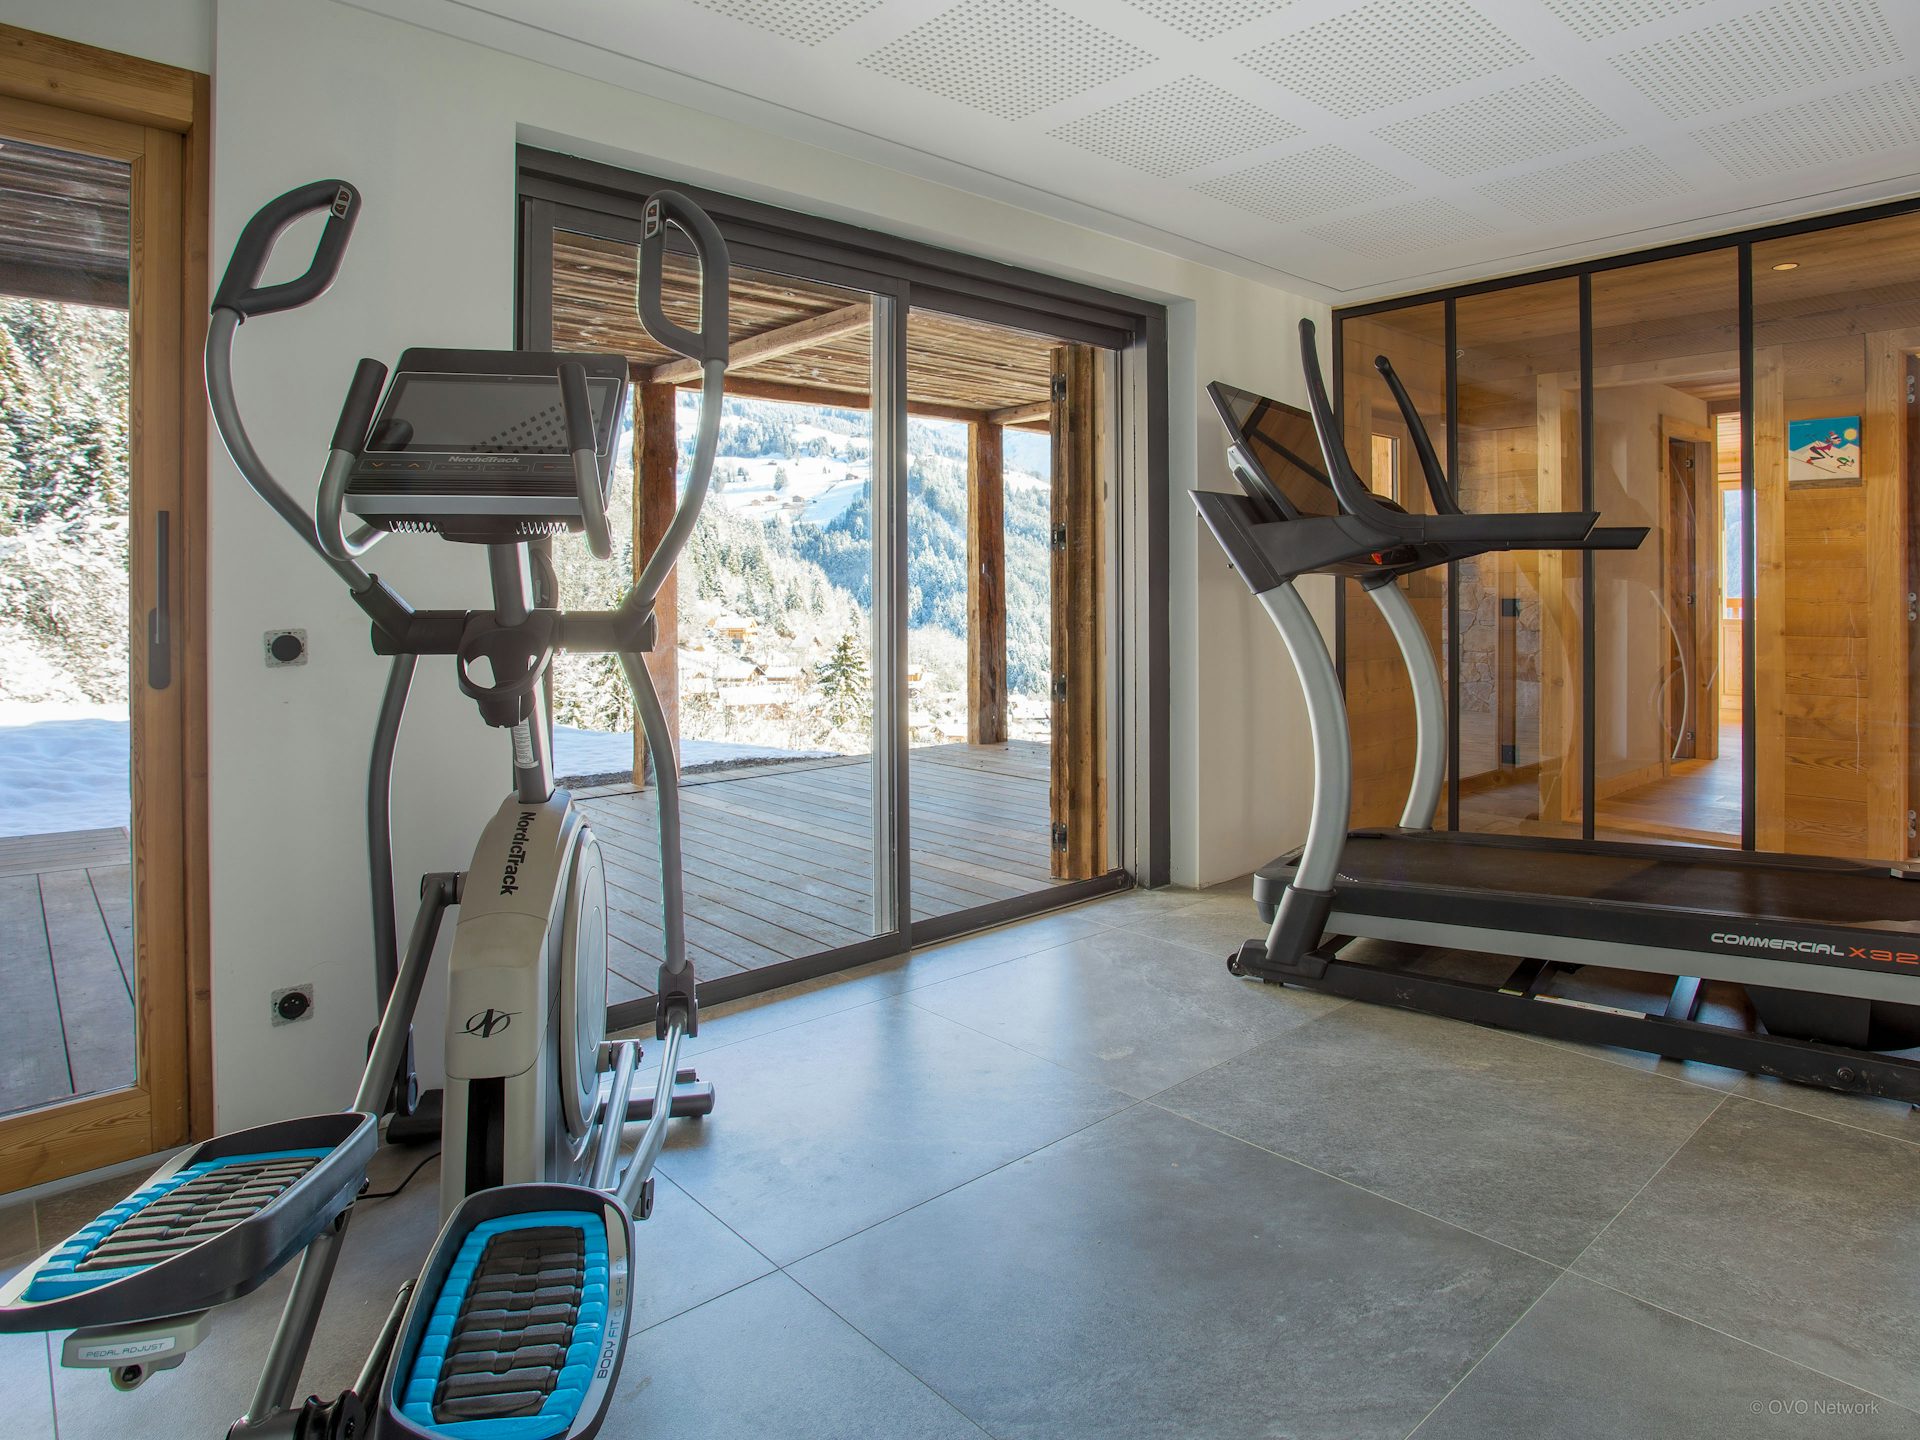 Gym with mountain views